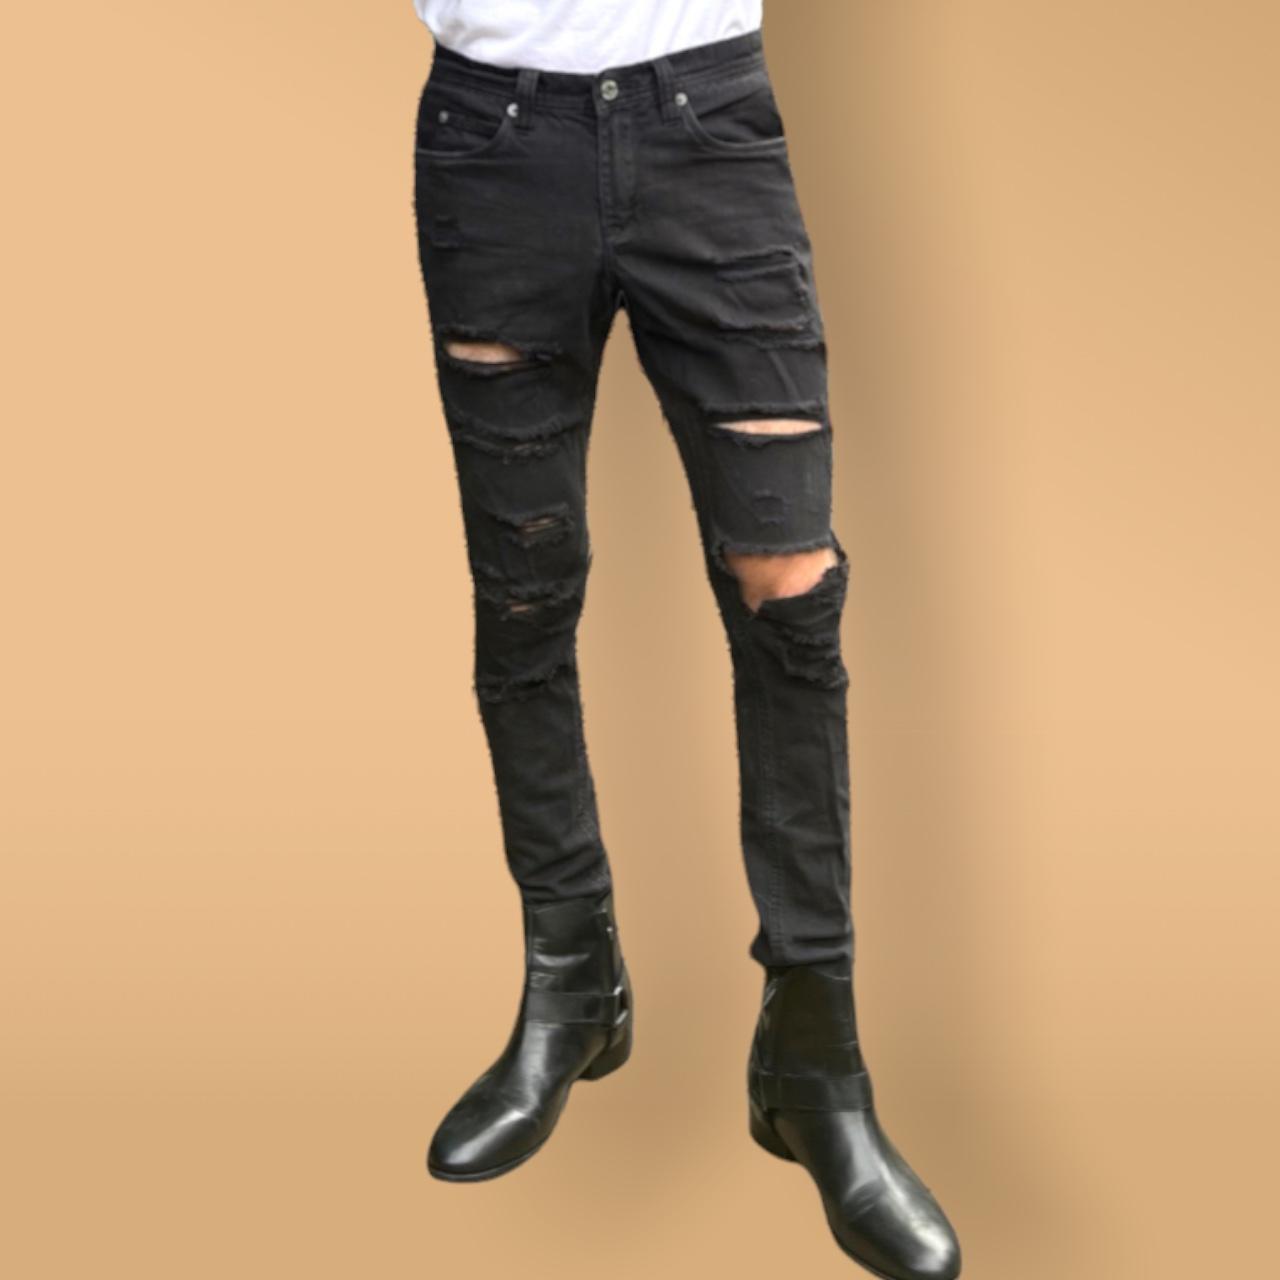 Product Image 1 - Mens Ripped Skinny Jeans
 